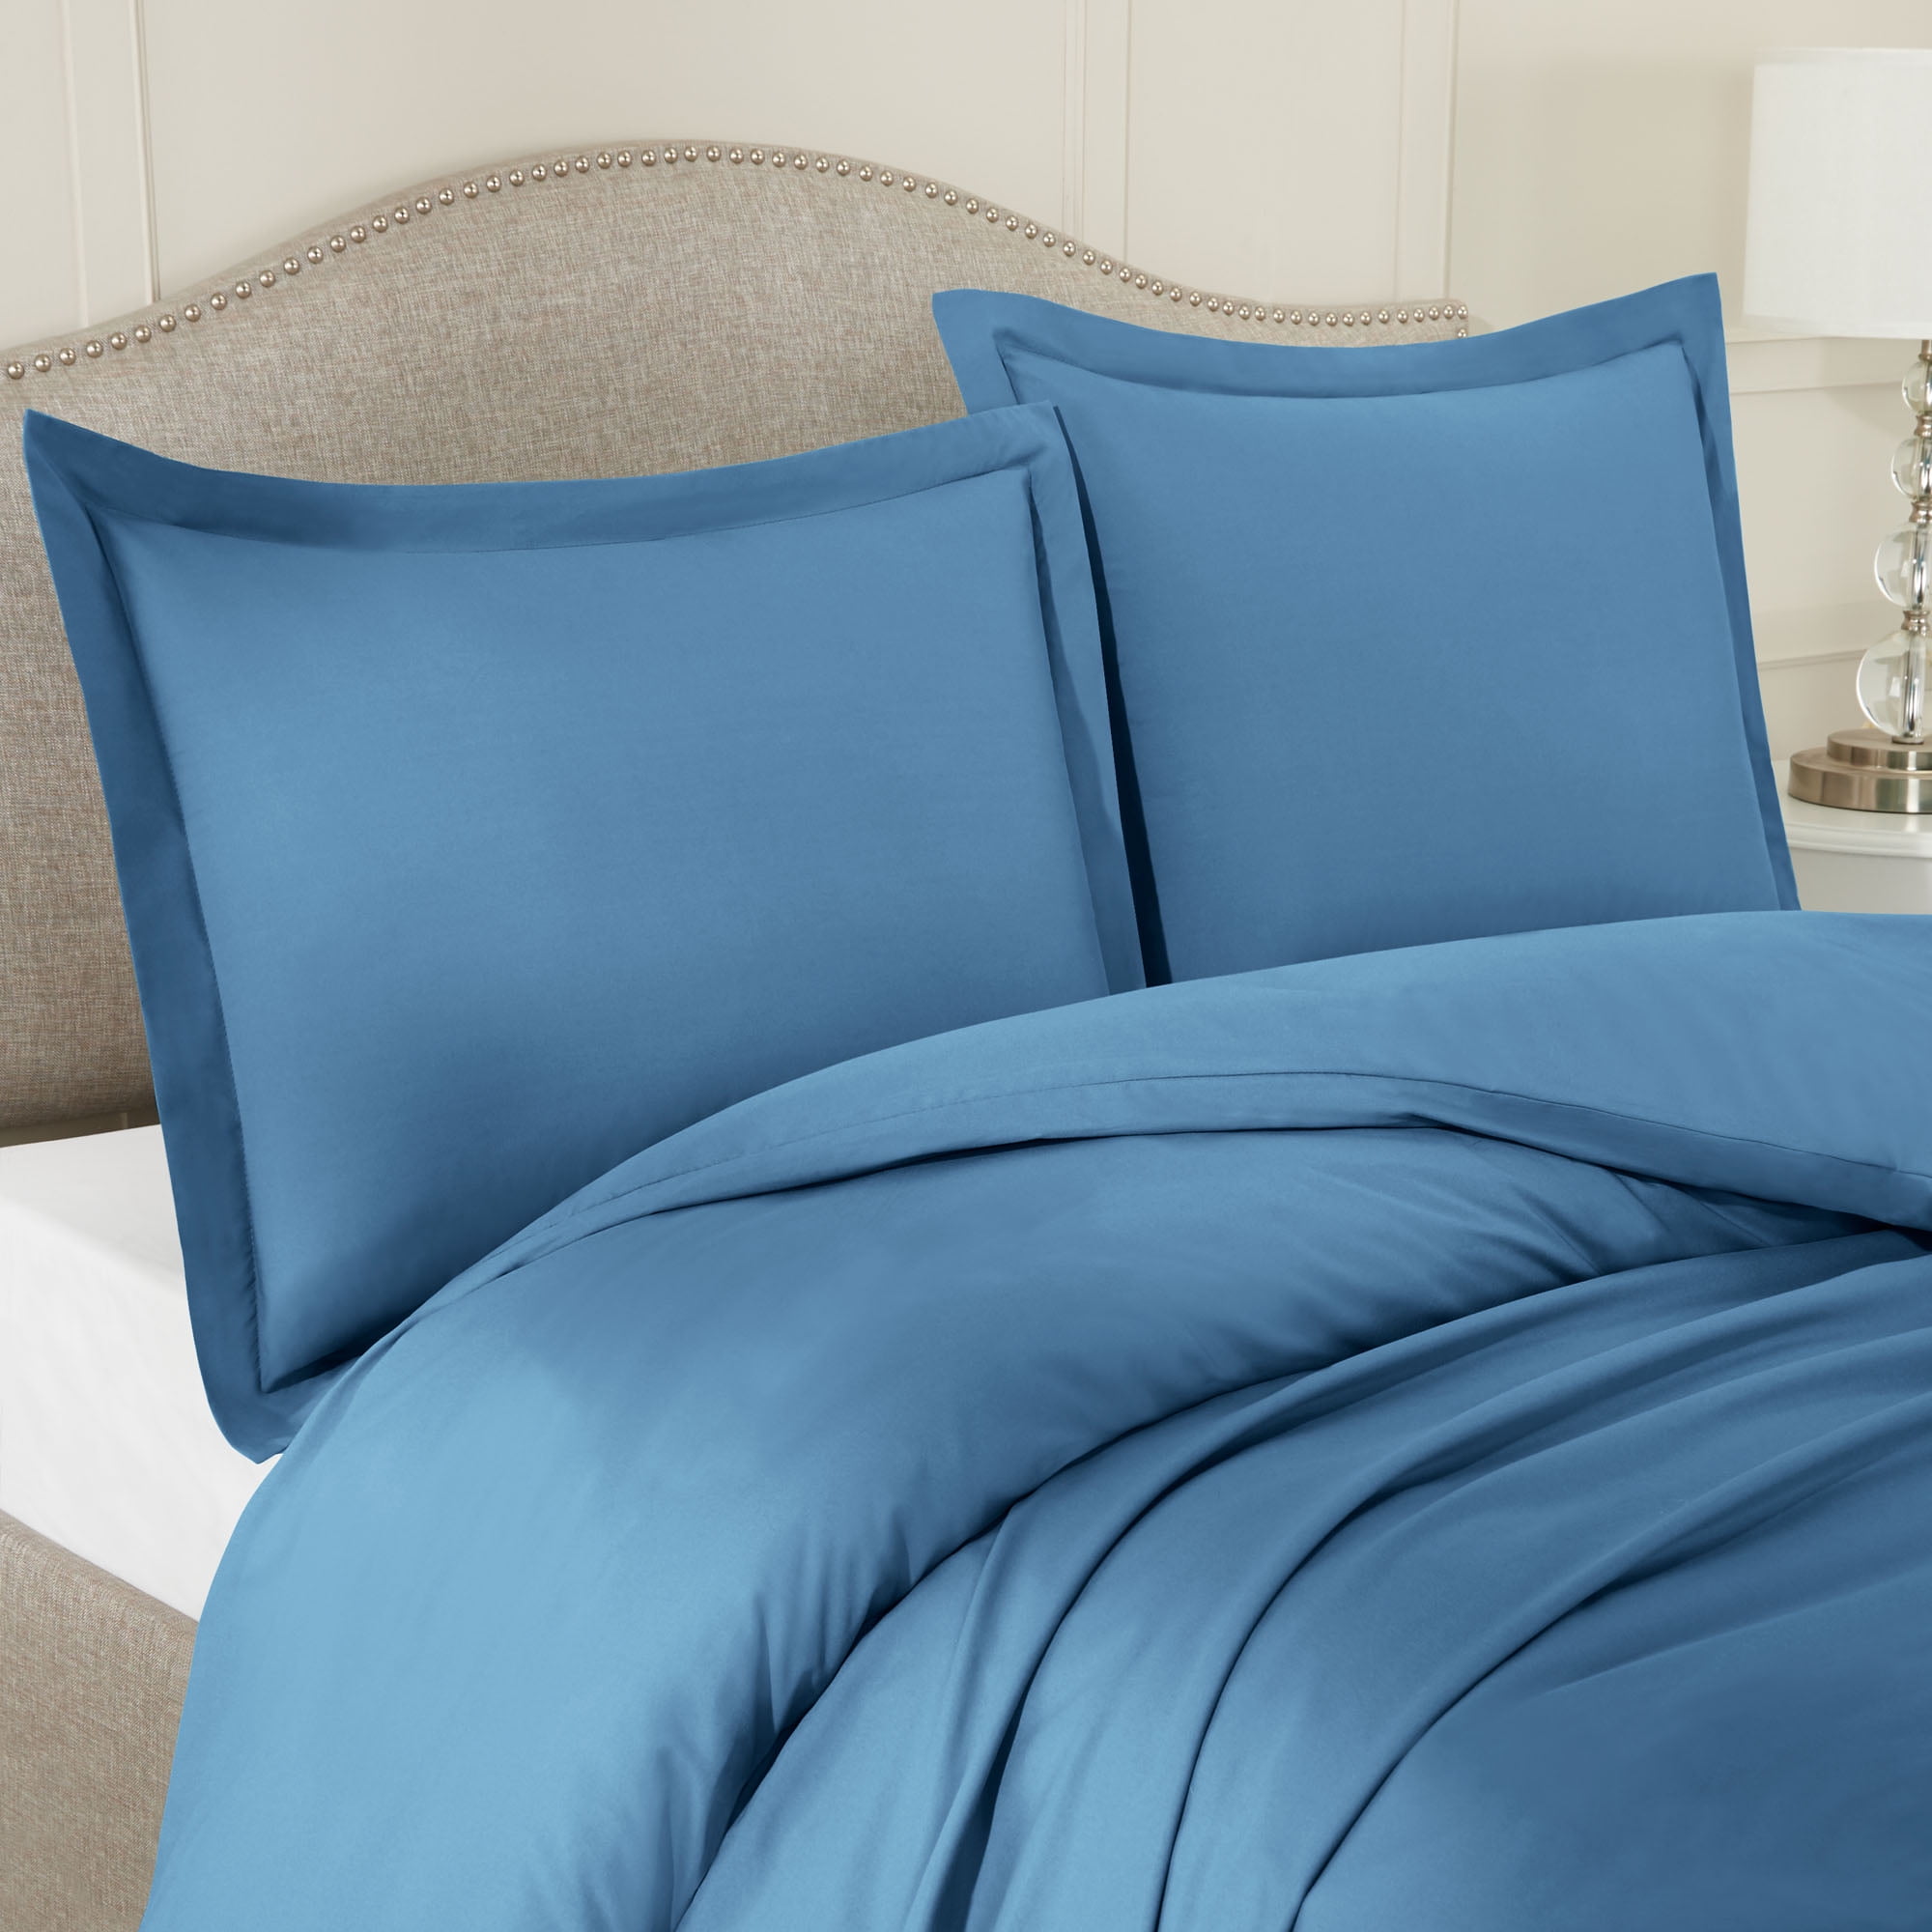 Super King Bedding Heaven® SECONDS Duvets Made by Fogarty Double Single King 